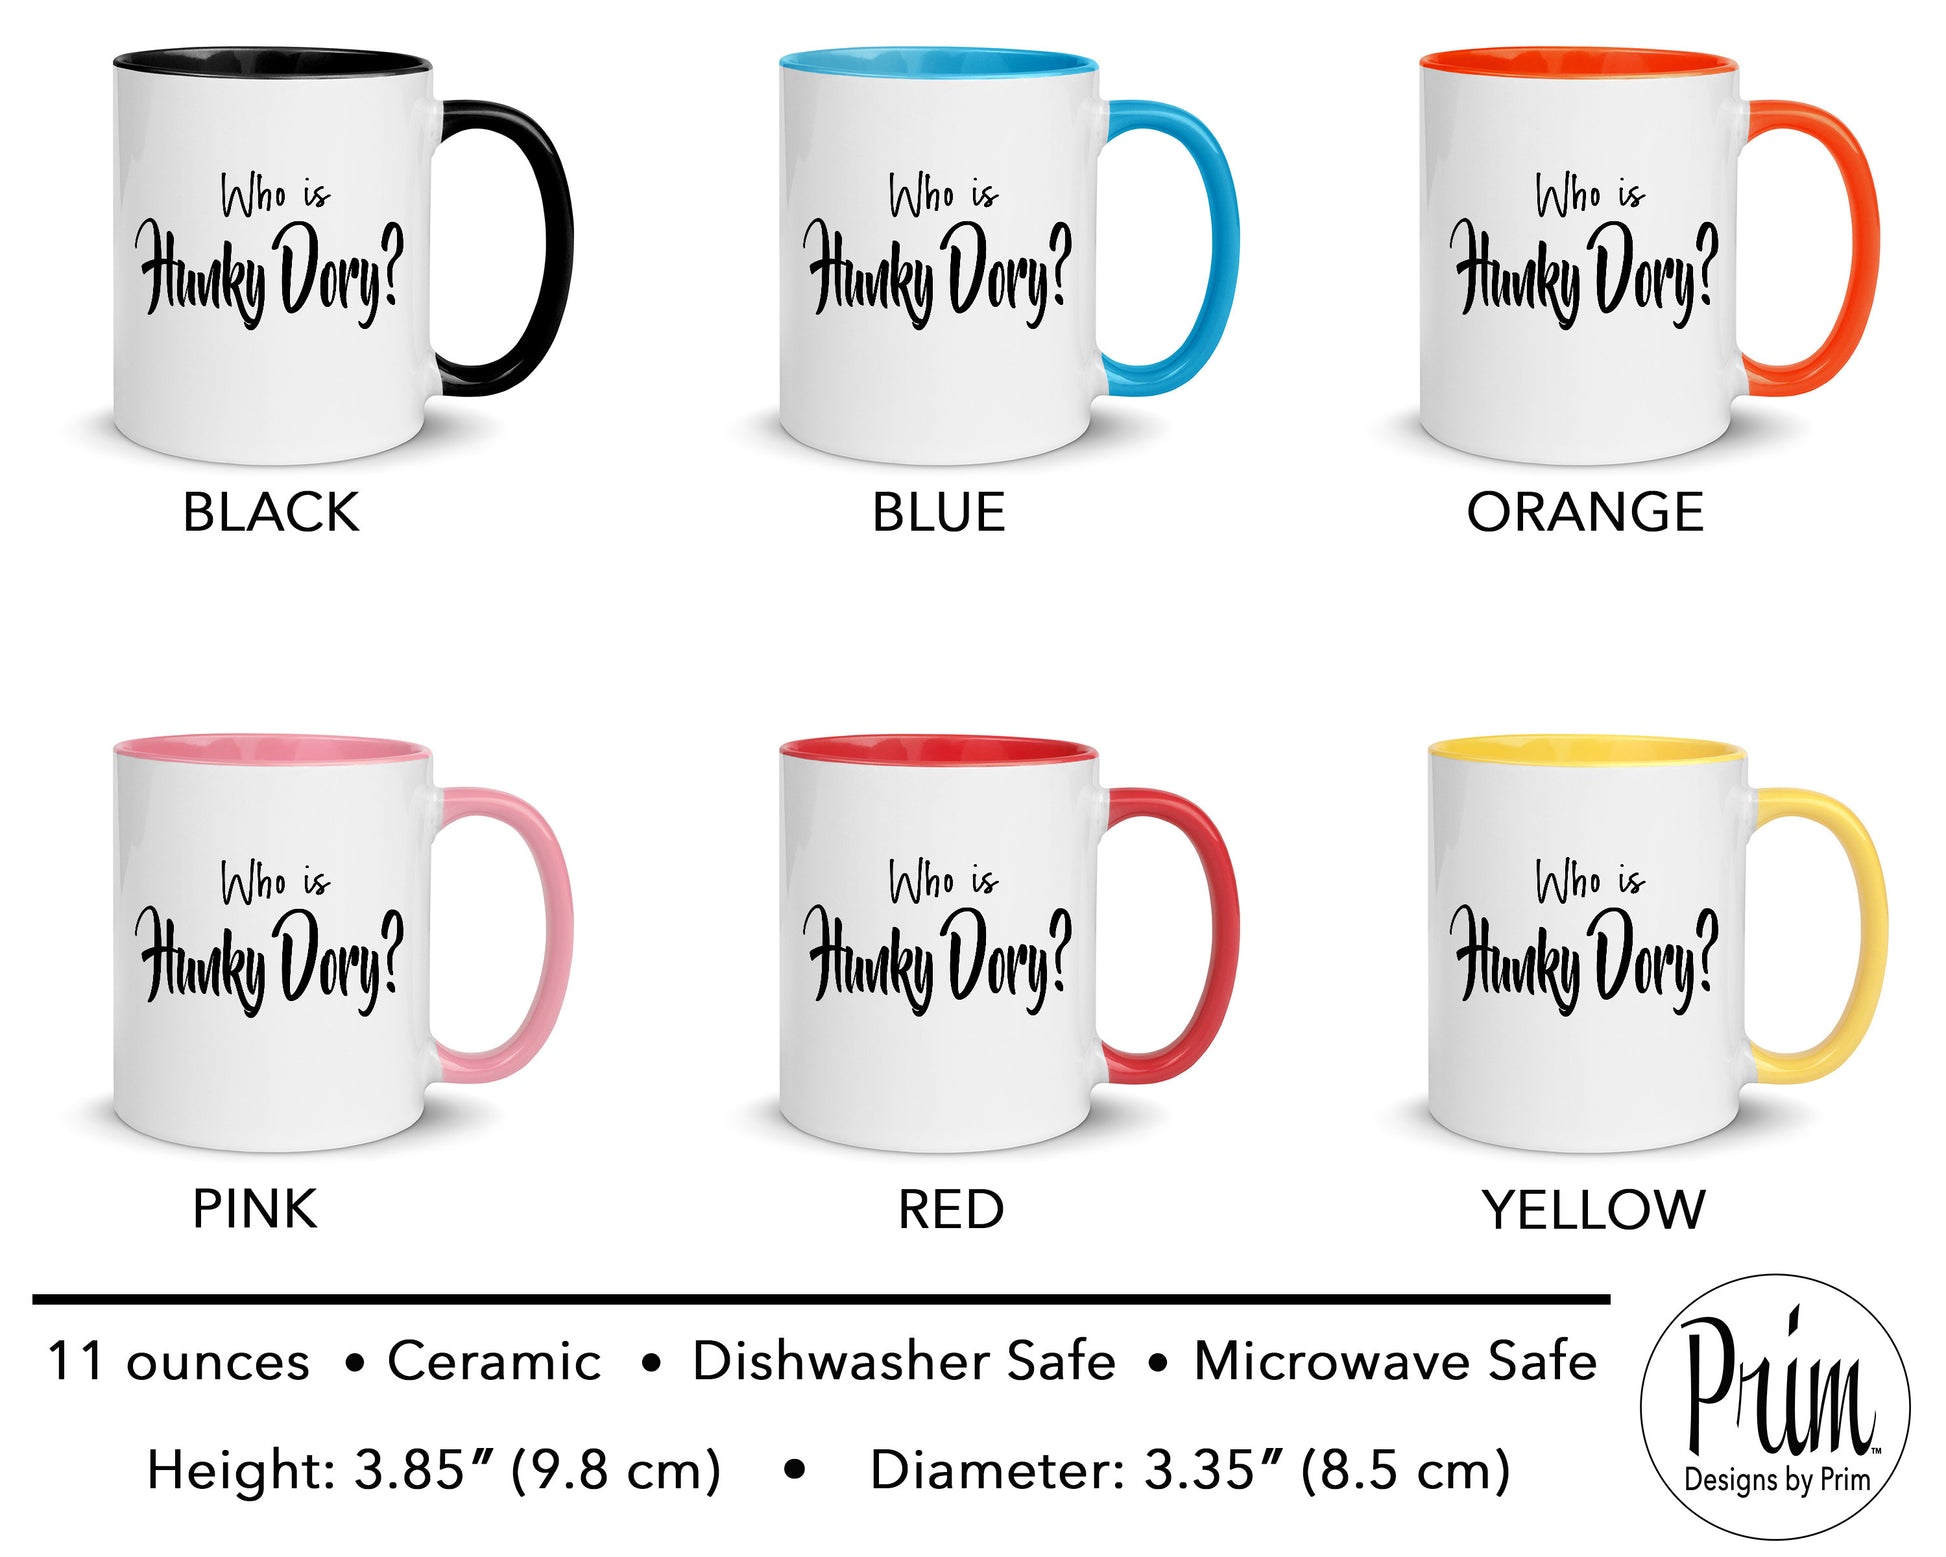 Designs by Prim Who is Hunky Dory Funny Kathy Hilton 11 Ounce Mug | The Real Housewives of Beverly Hills Bravo Fan Typography Quote Graphic Coffee Tea Cup